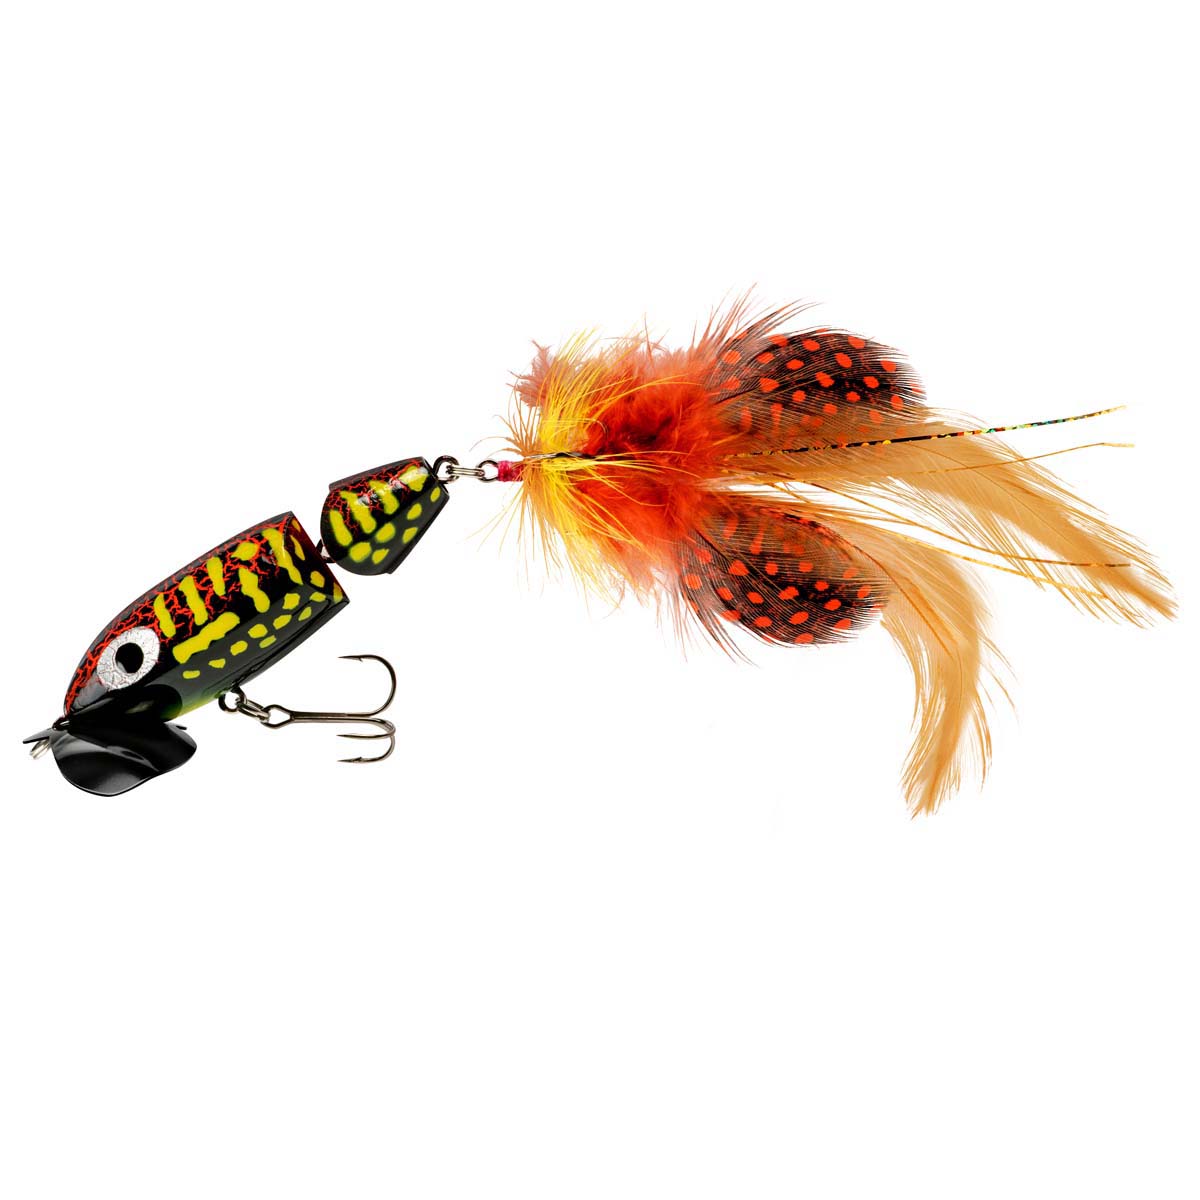 Arbogast Jitterbug 2.0 Jointed Surface Lure Coach Hog